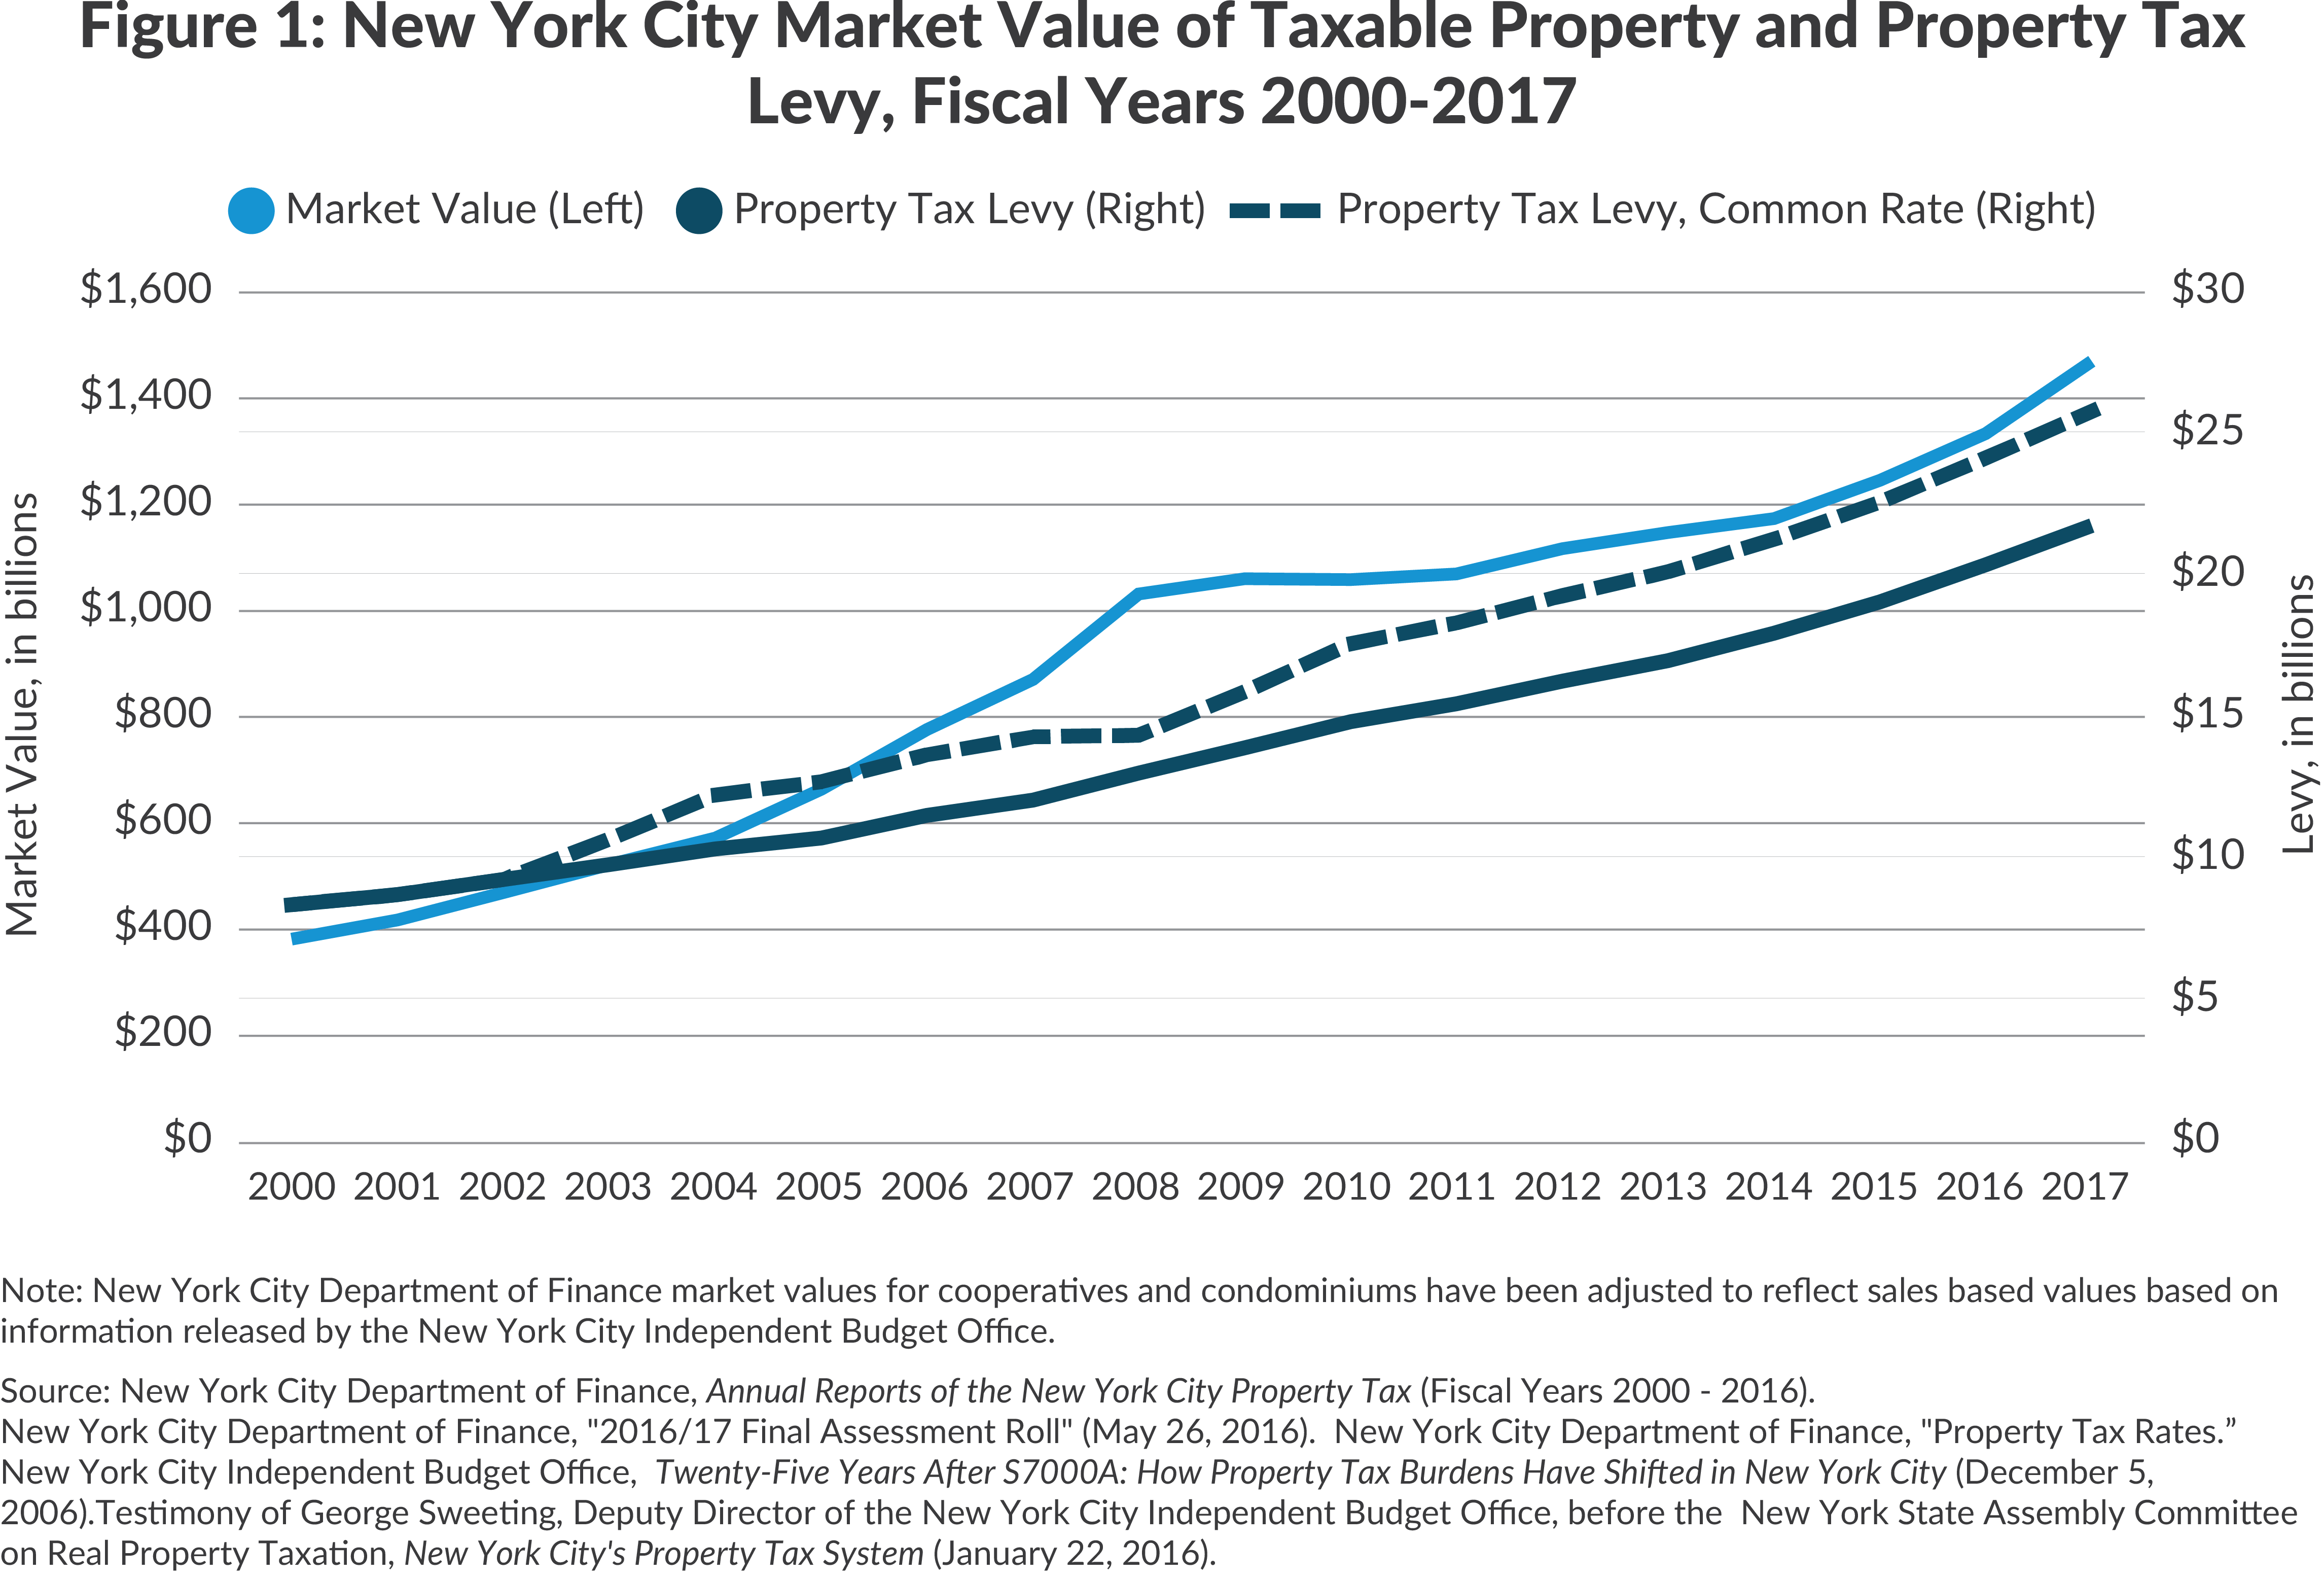 Growth in NYC property market values and tax levy